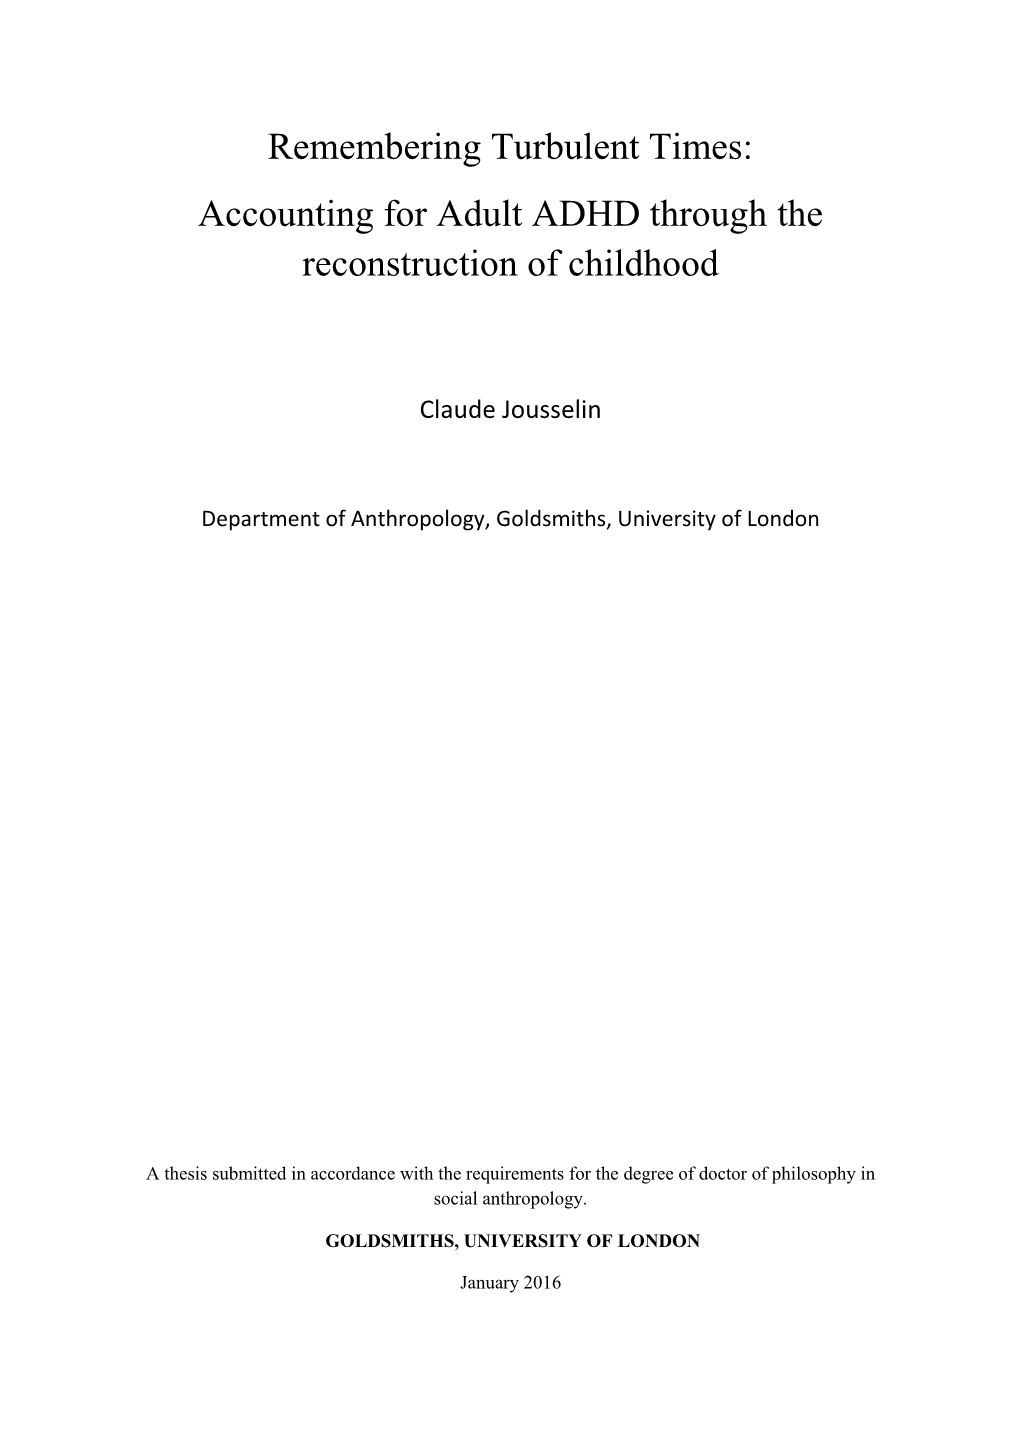 Accounting for Adult ADHD Through the Reconstruction of Childhood